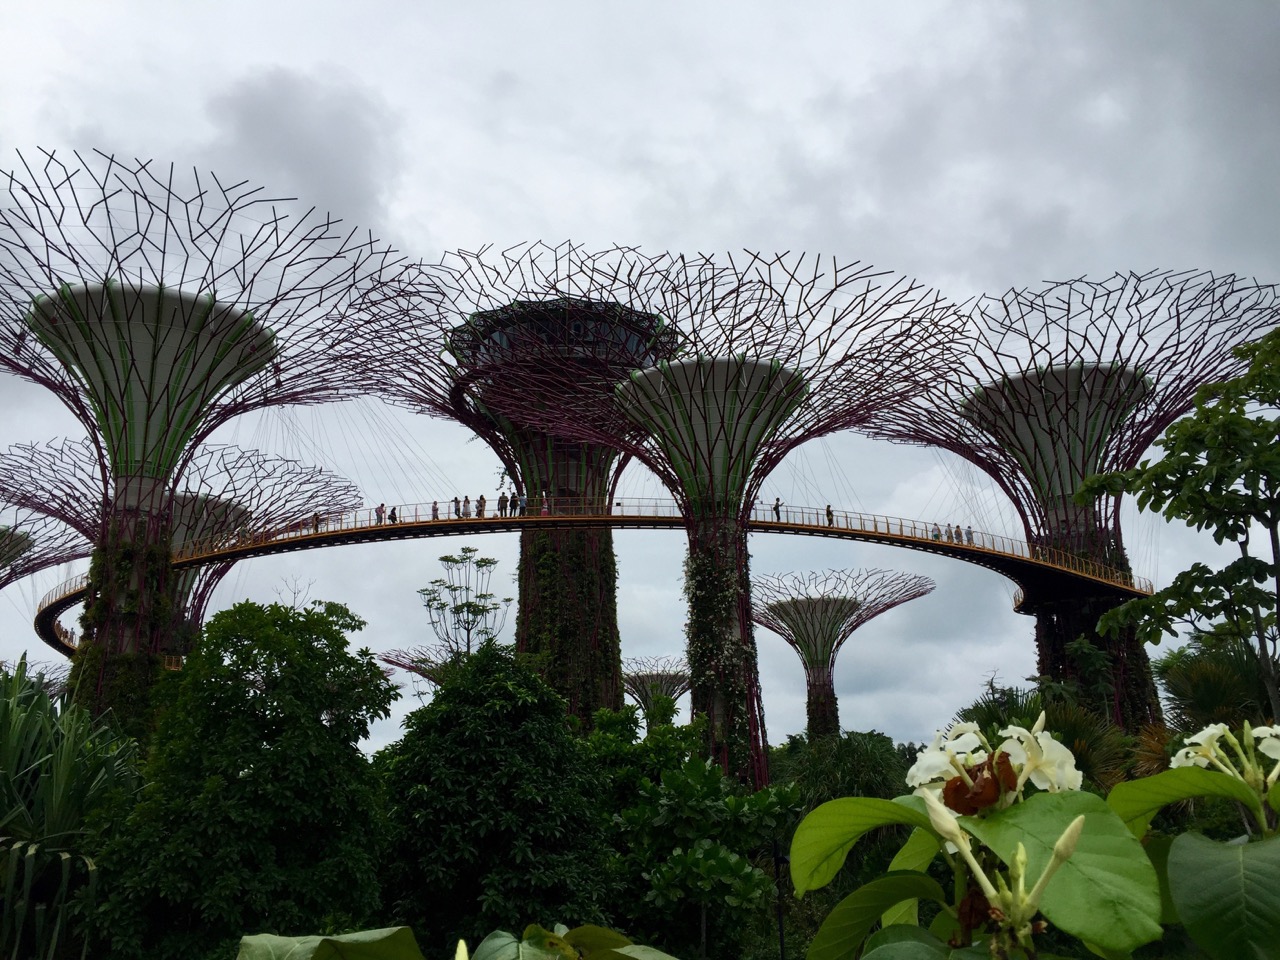 Singapore's gardens by the bay